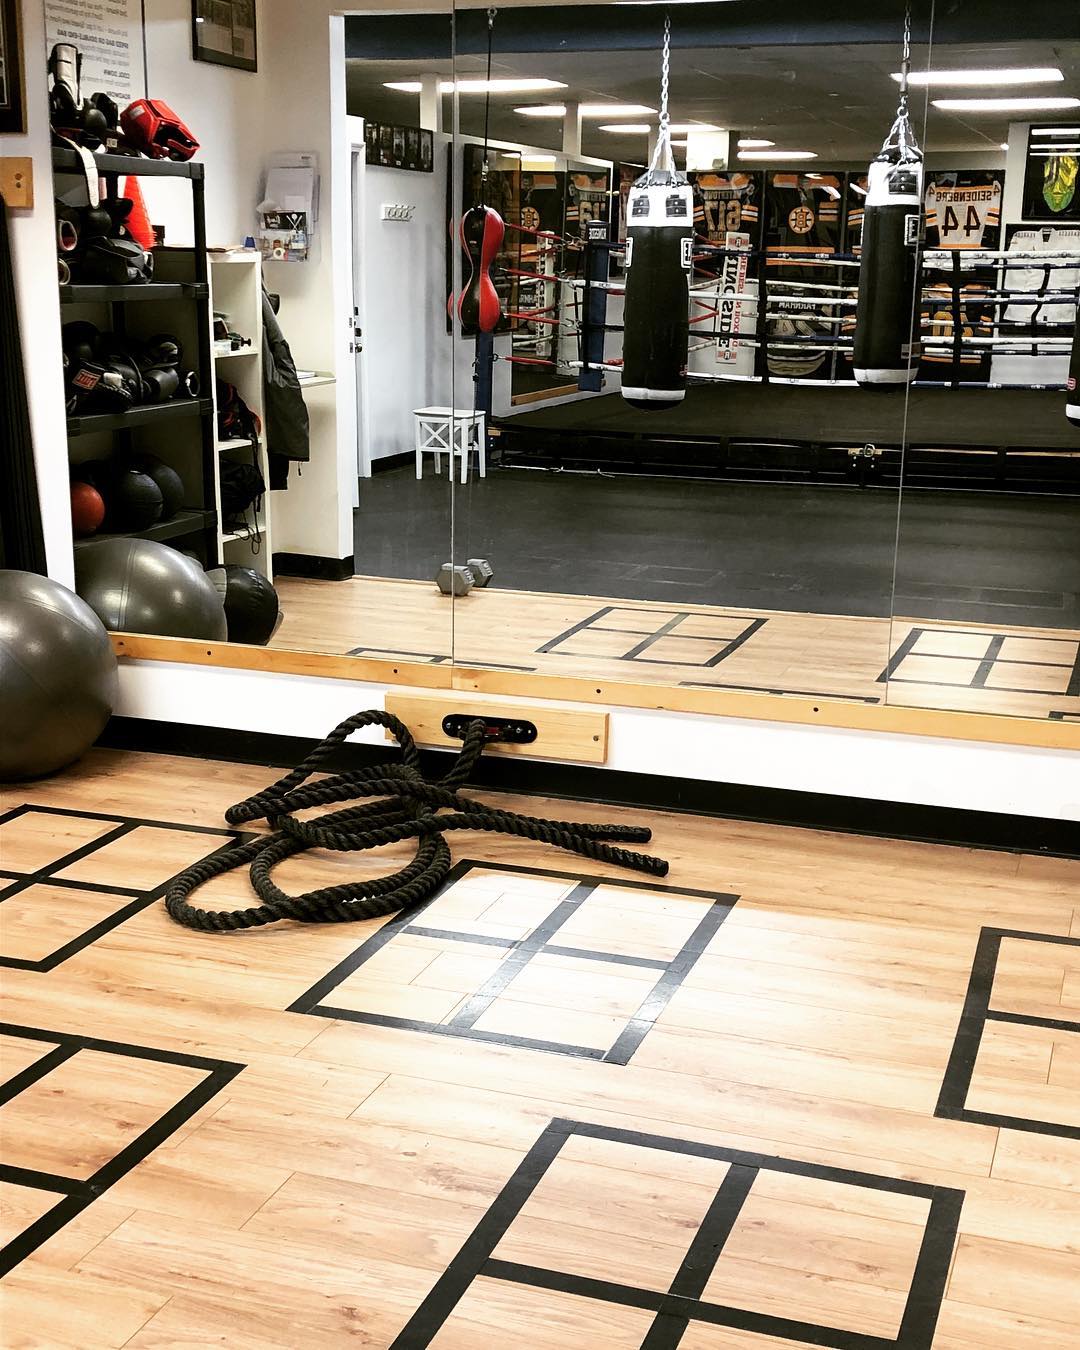 #Boxing – By learning the proper form and technique will give you a much better full body workout without causing any injuries. Check us out!! . @tommymcinerney #sweetscience #boxing #fitness #boxingworkout #workout #exercise #fitbox #boxfit #hiit #skills #footwork #technique #boxingtraining #training #boxingtrainer #trainer #dedham #boston